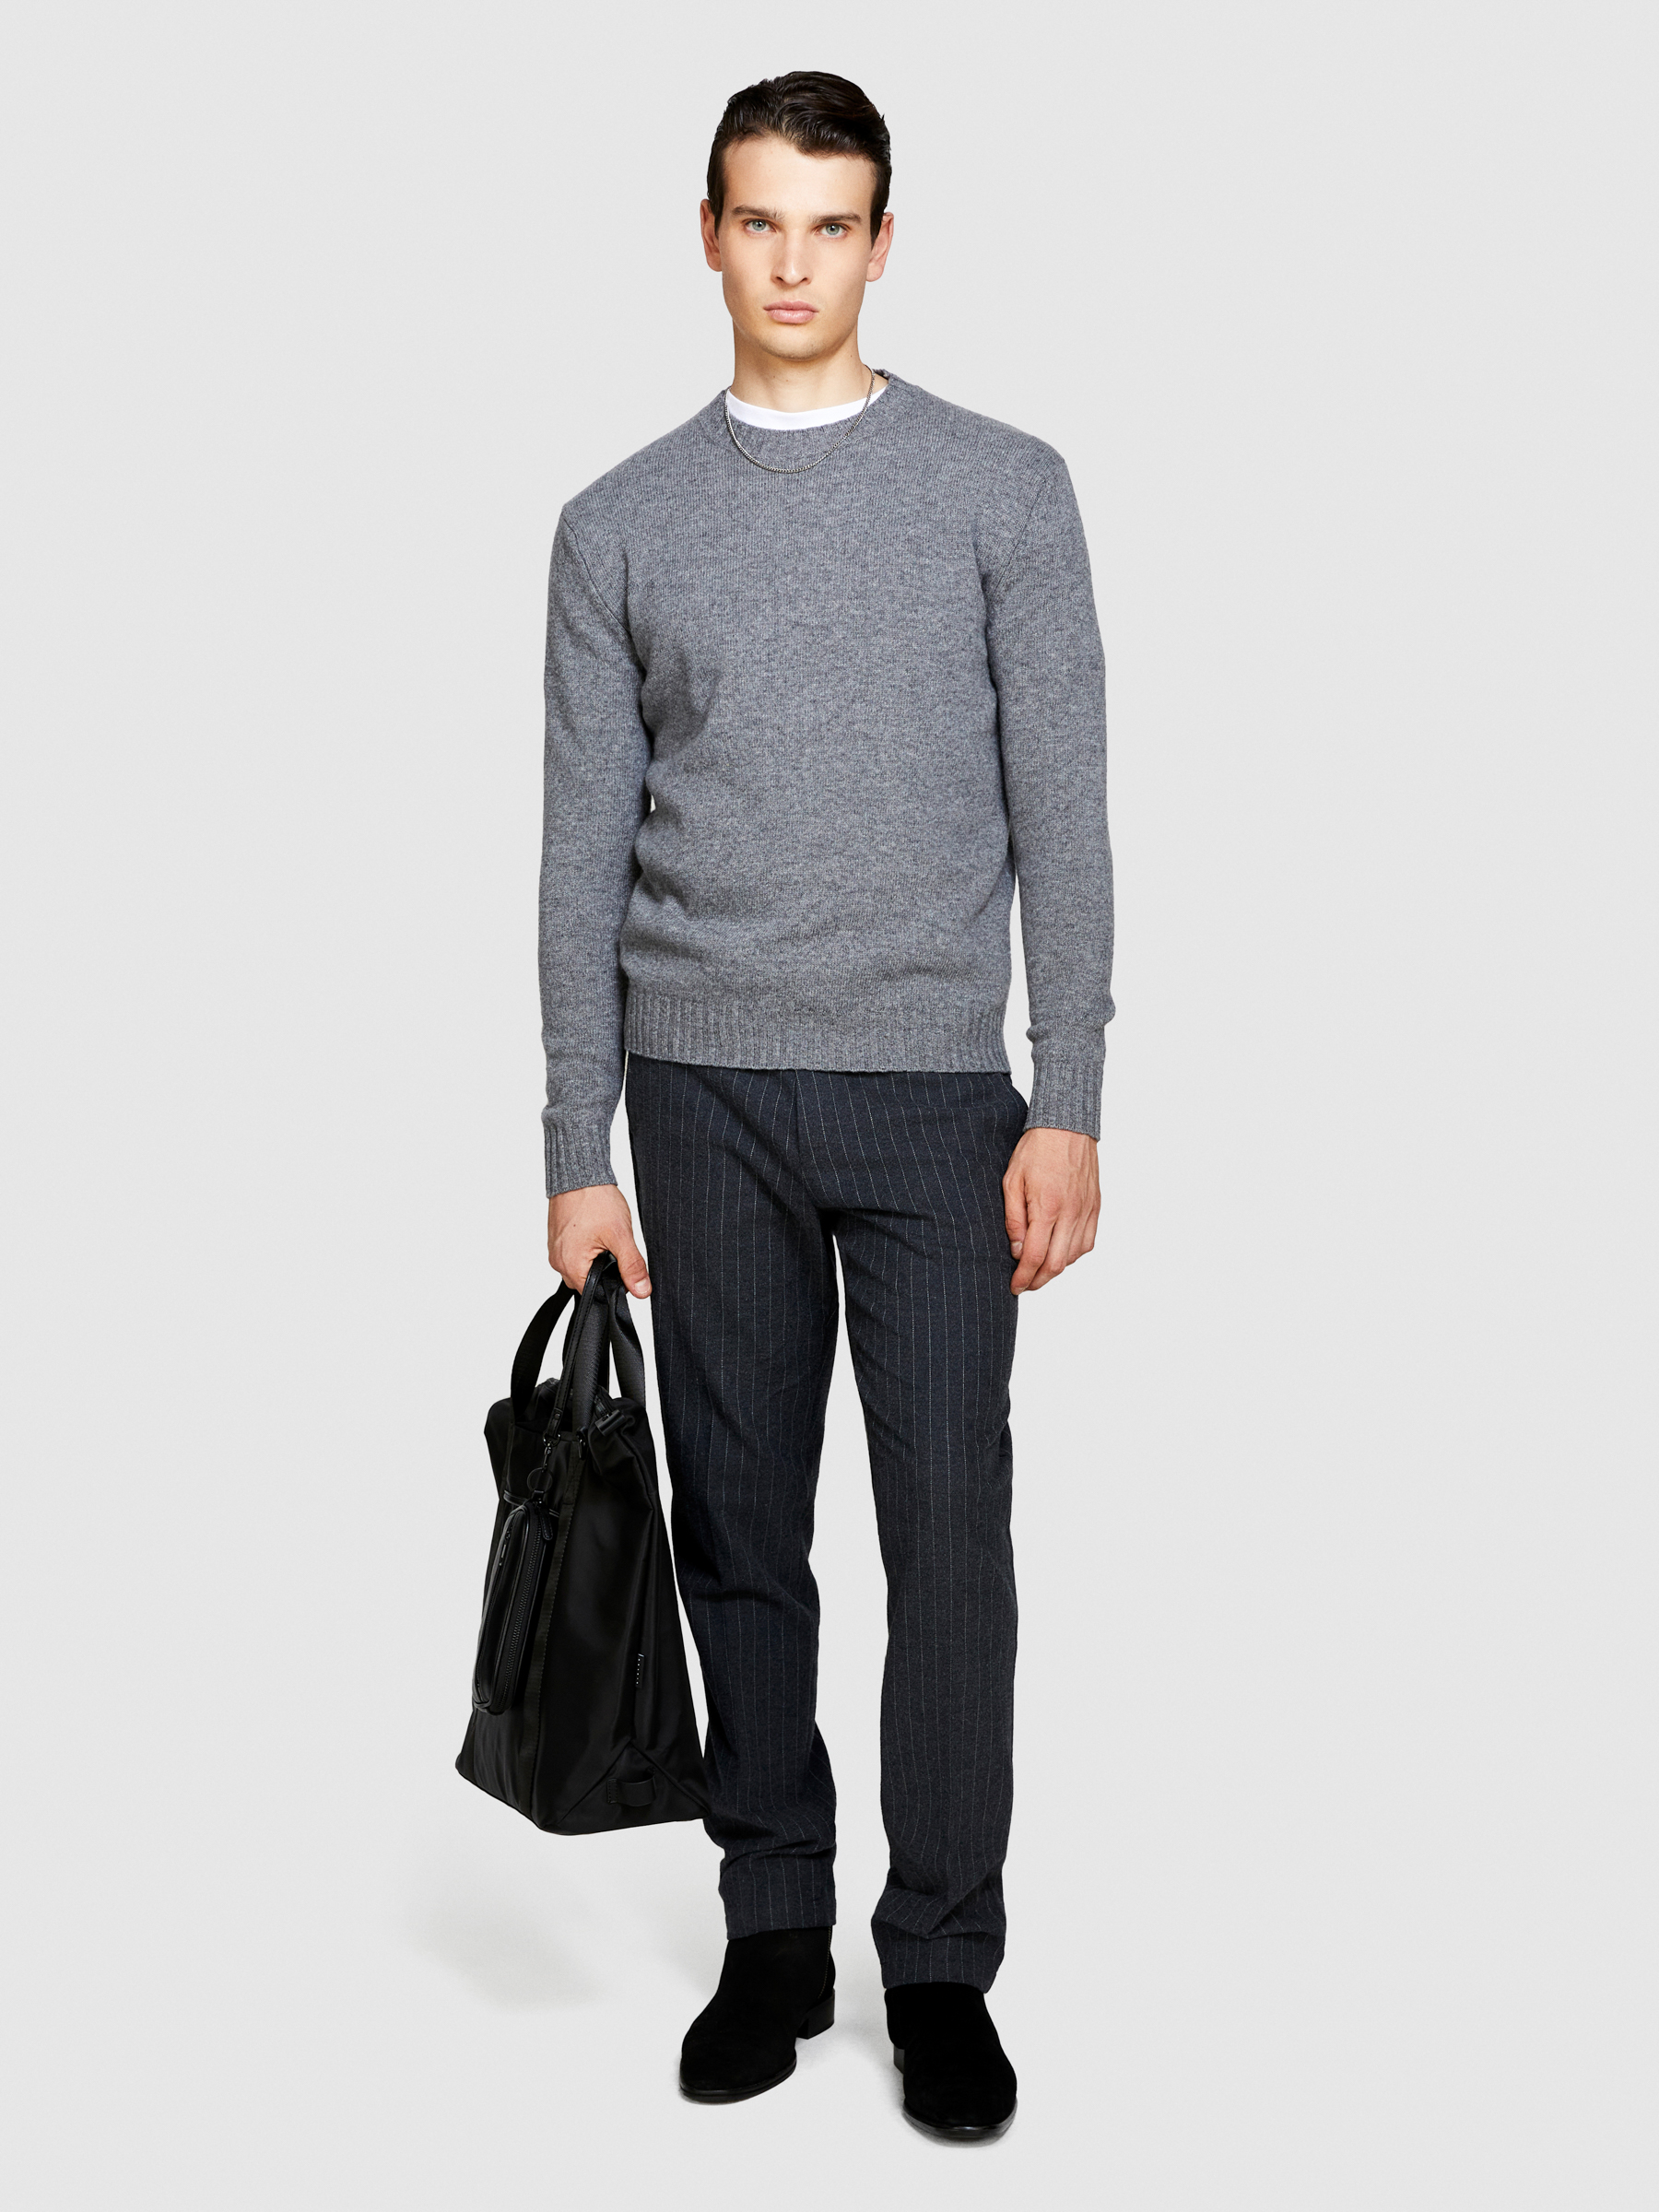 Sisley - Crew Neck Sweater In Wool Blend, Man, Gray, Size: S